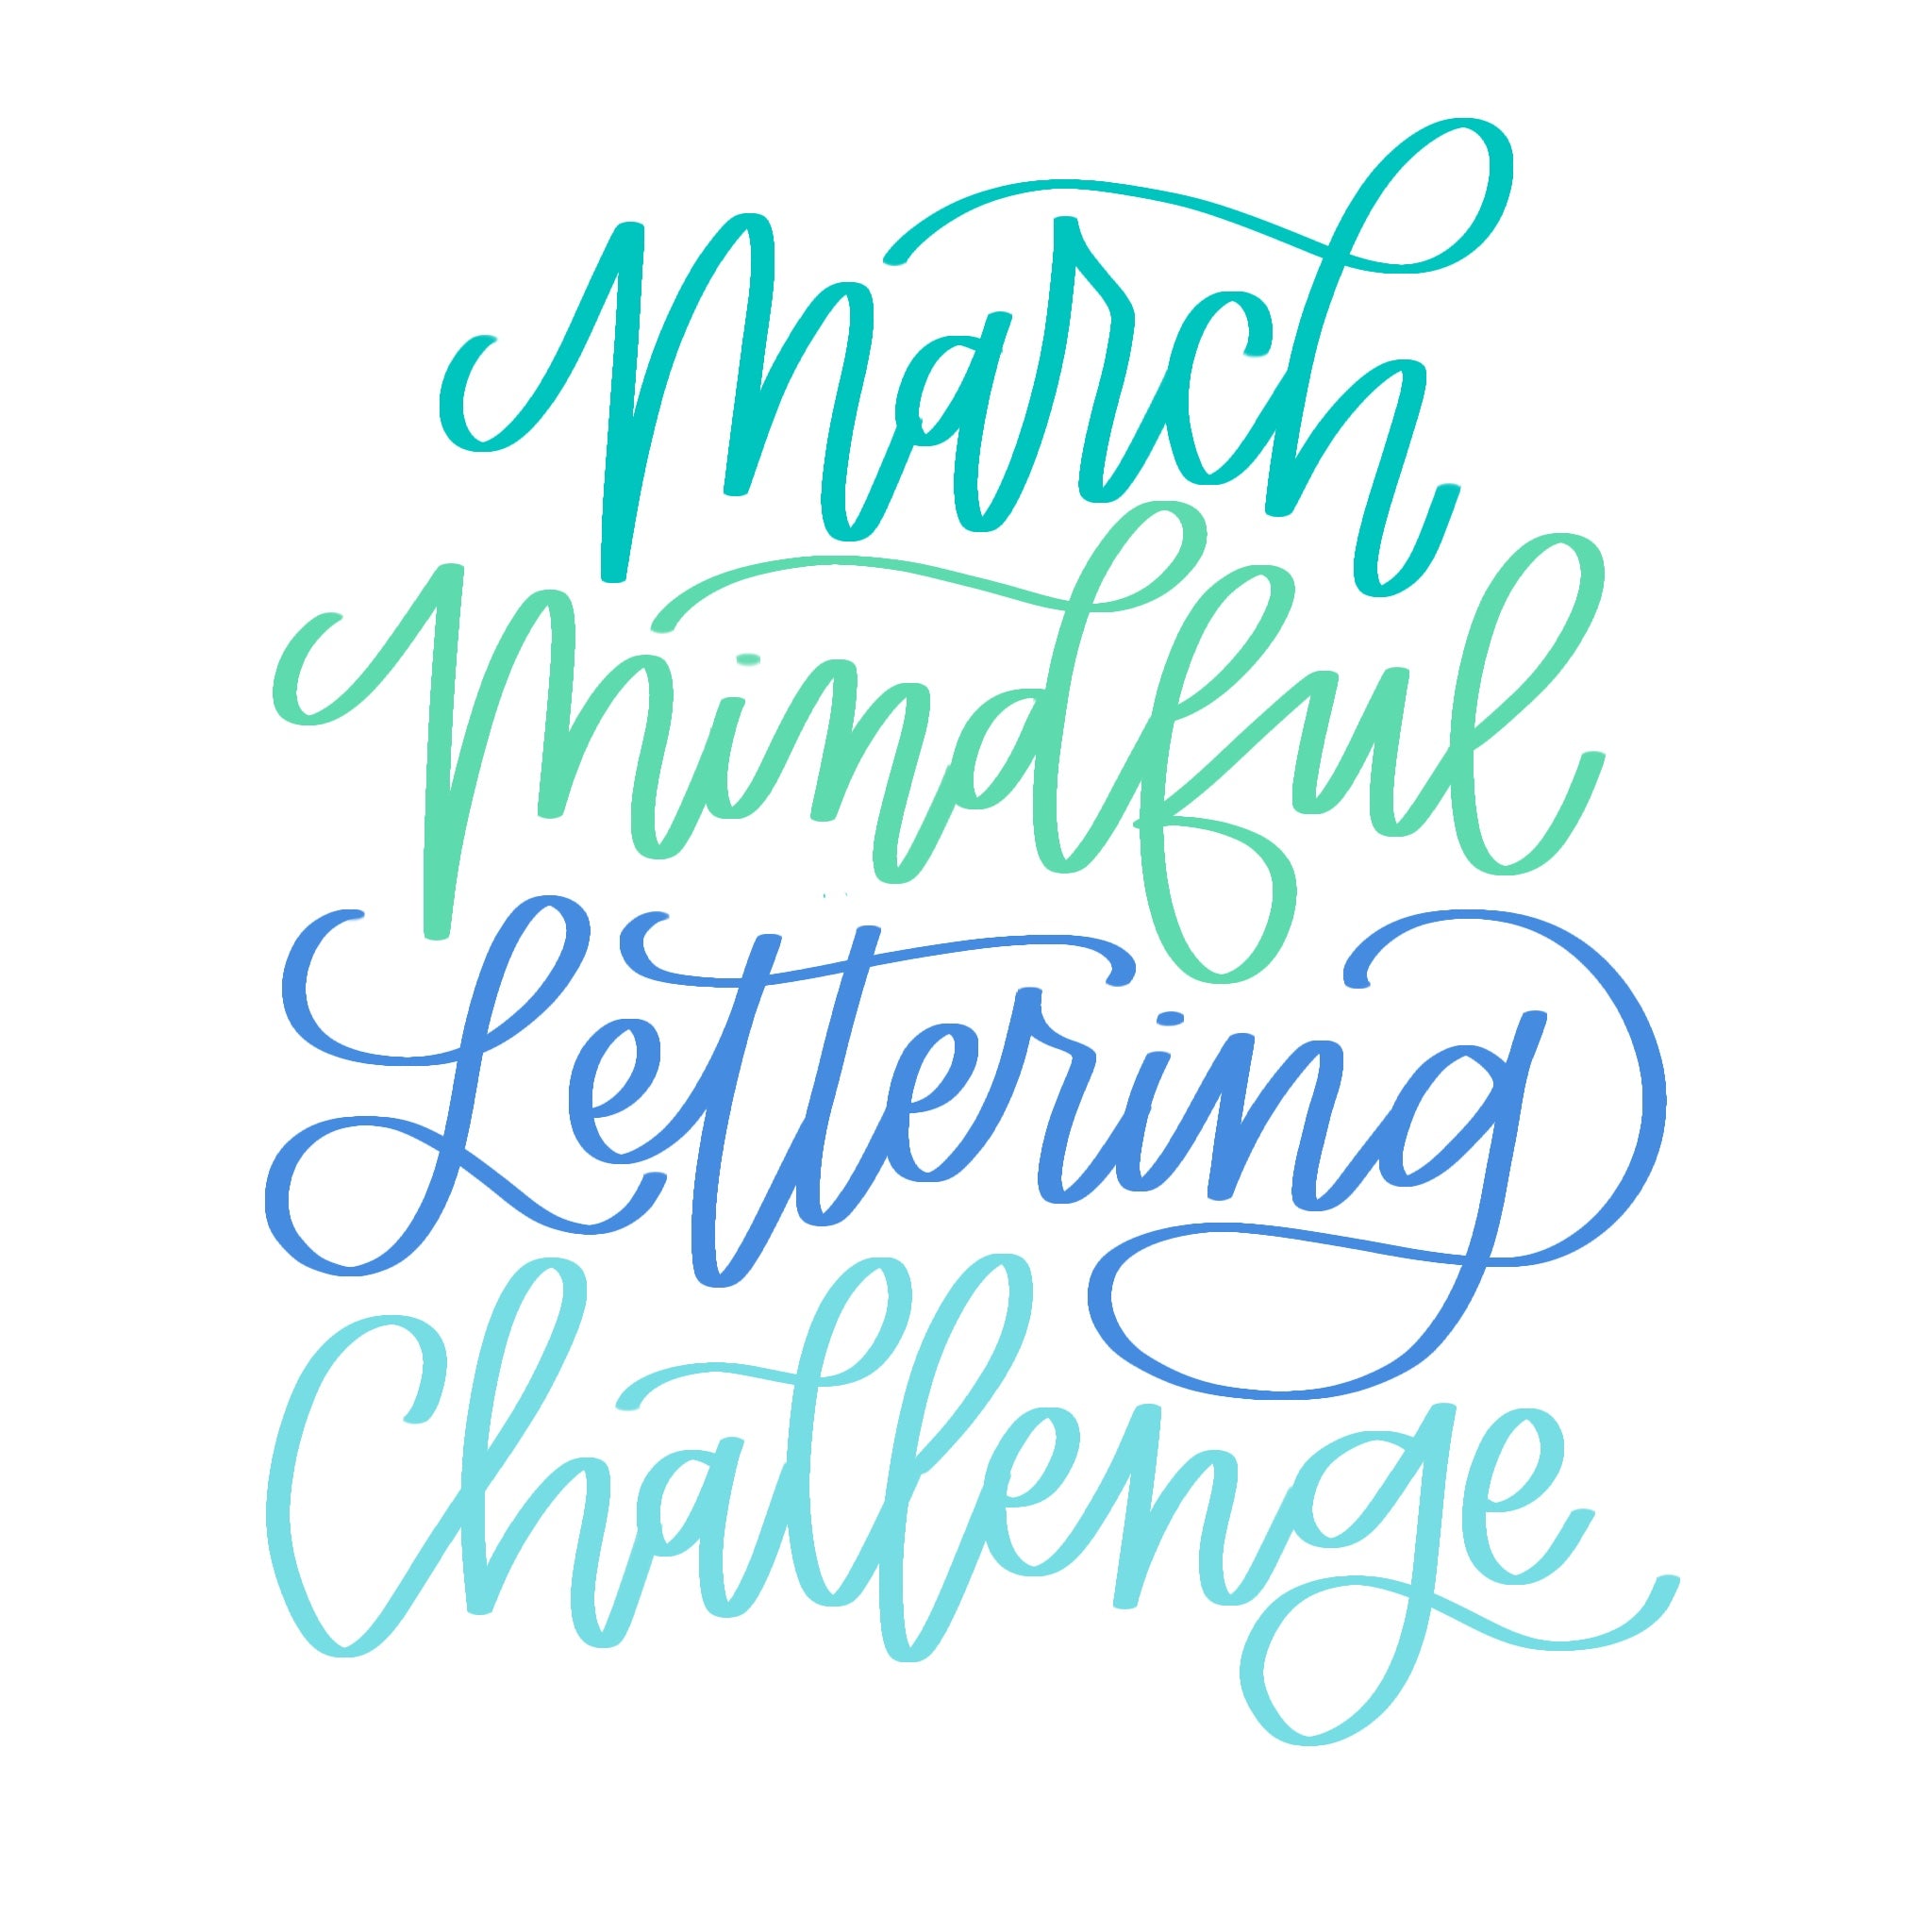 Lisa Funk  Hand Lettering on Instagram: Day 1 of our Mindful Lettering  Challenge! Word to letter: BREATHE Grab a pen and paper and follow along.  I'll show you how to achieve